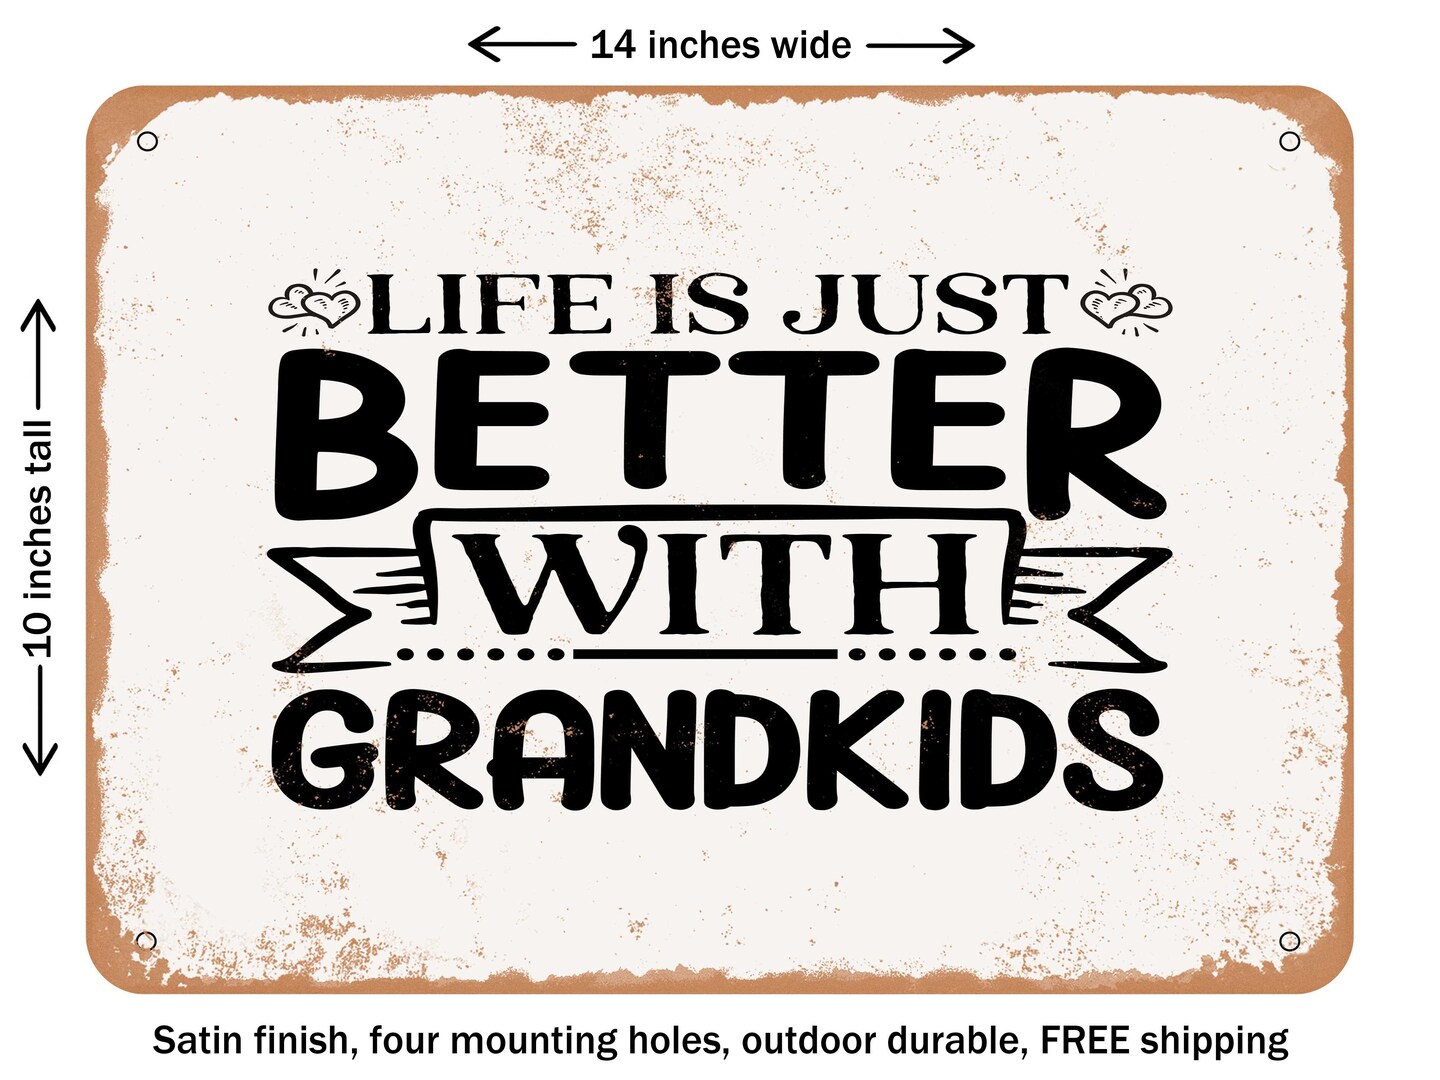 DECORATIVE METAL SIGN - Life is Just Better With Grandkids - Vintage Rusty Look